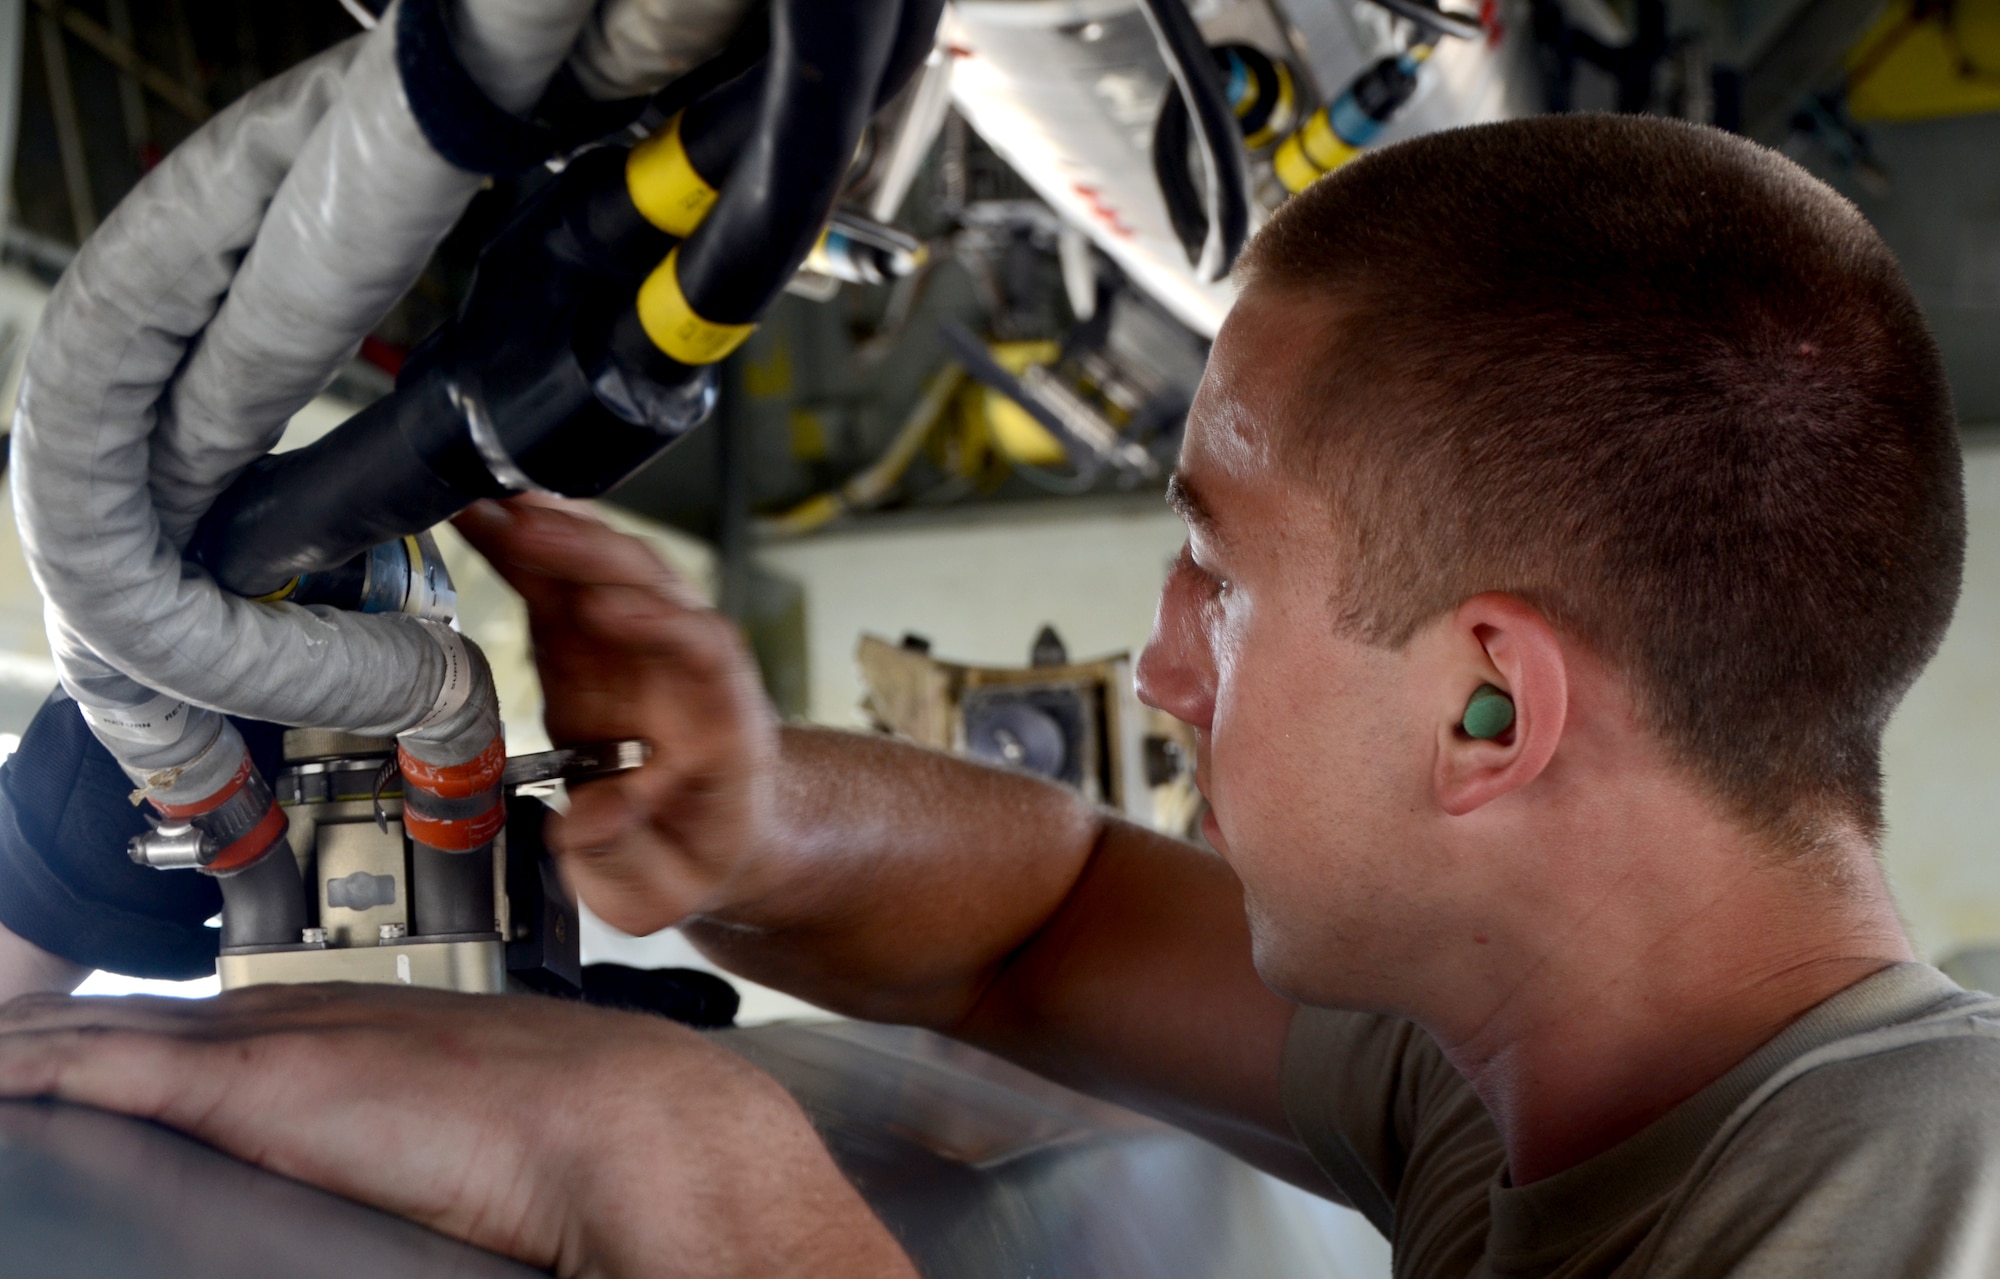 Airman 1st Class Adam Schaetzl, 36th Expeditionary Aircraft Maintenance Squadron weapons load technician, installs an umbilical connector into a training AGM-86C Conventional Air-Launched Cruise Missile during a B-52 Stratofortress load demonstration at Andersen Air Force Base, Guam, April 16, 2013. All EAMUs deployed to Andersen have to pass a load inspection within 10 days of arrival as part of a U.S. Pacific Command requirement to ensure all tools and equipment are mission ready. It is opportunity for maintainers to obtain munitions-loading experience in both a training and tropical environment. (U.S. Air Force photo by Senior Airman Benjamin Wiseman/Released)